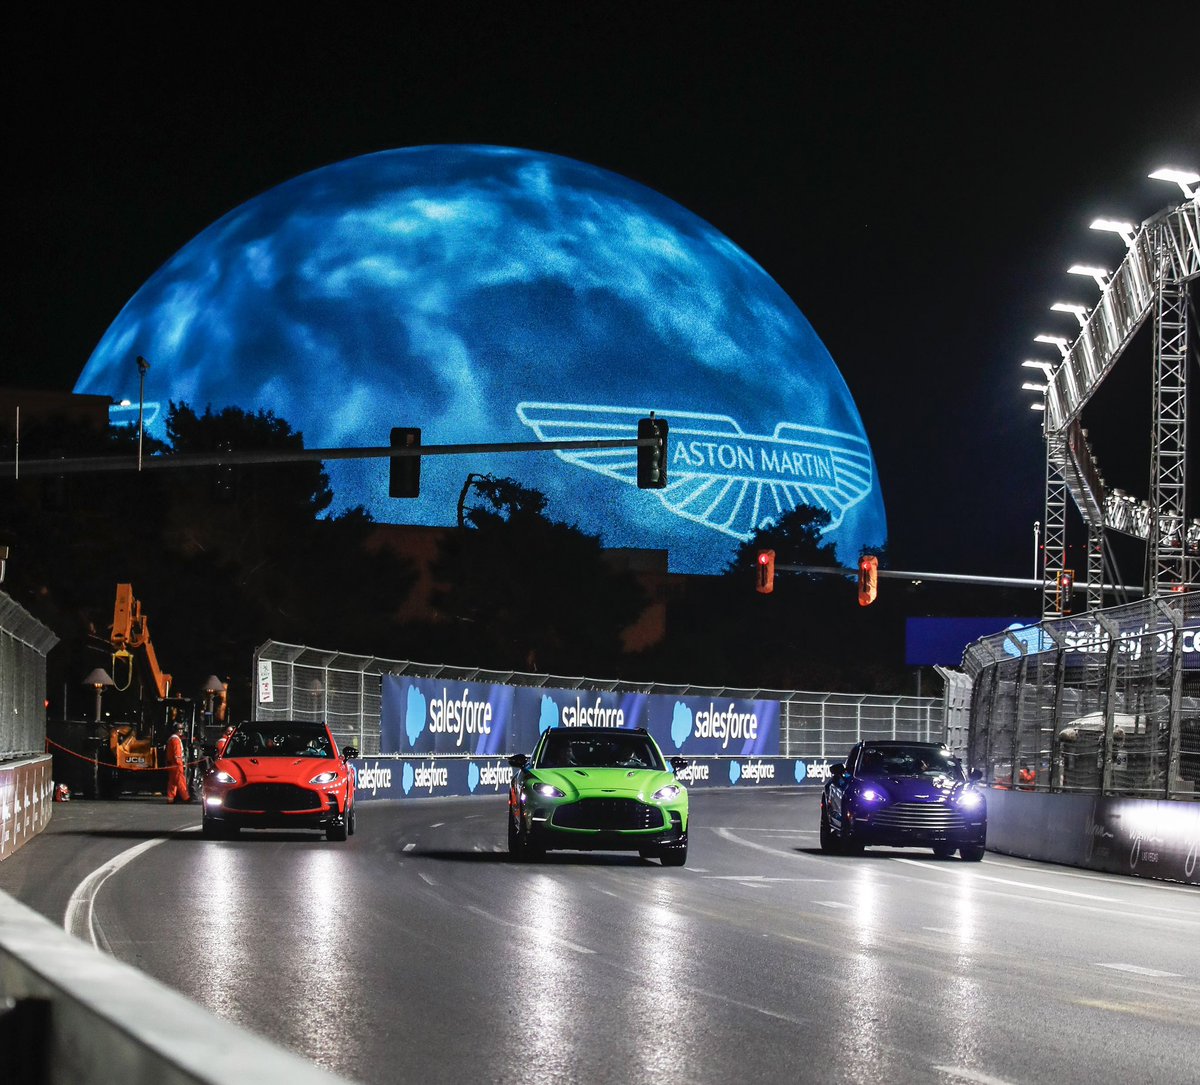 Let loose on the Vegas circuit last night. Such a cool experience to be out on circuit under the lights of the city and being up close to the Sphere. #astonmartin #LasVegasGP #DBX